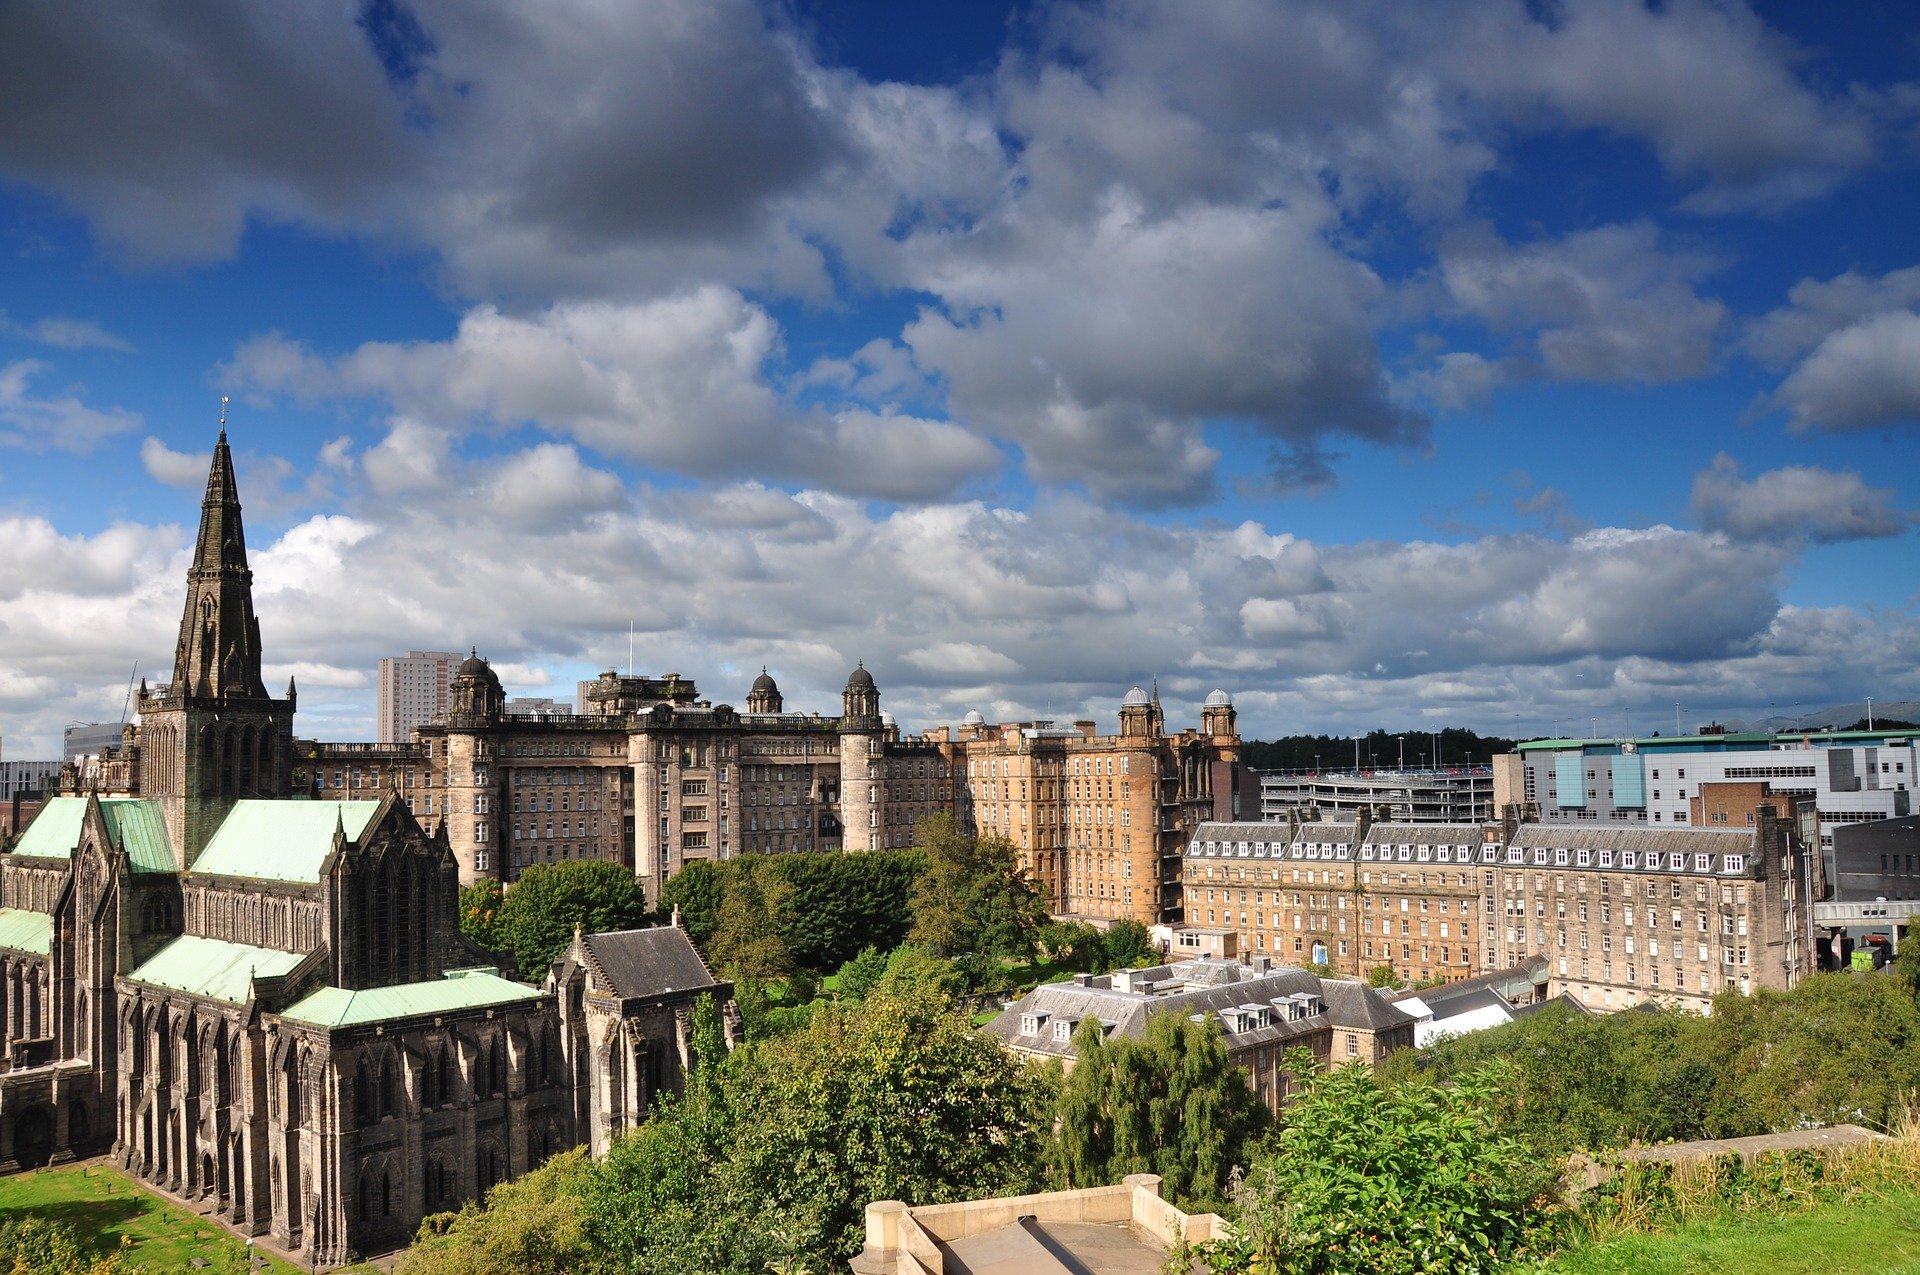 And finally... Experts assess Empire’s mark on key Scottish buildings